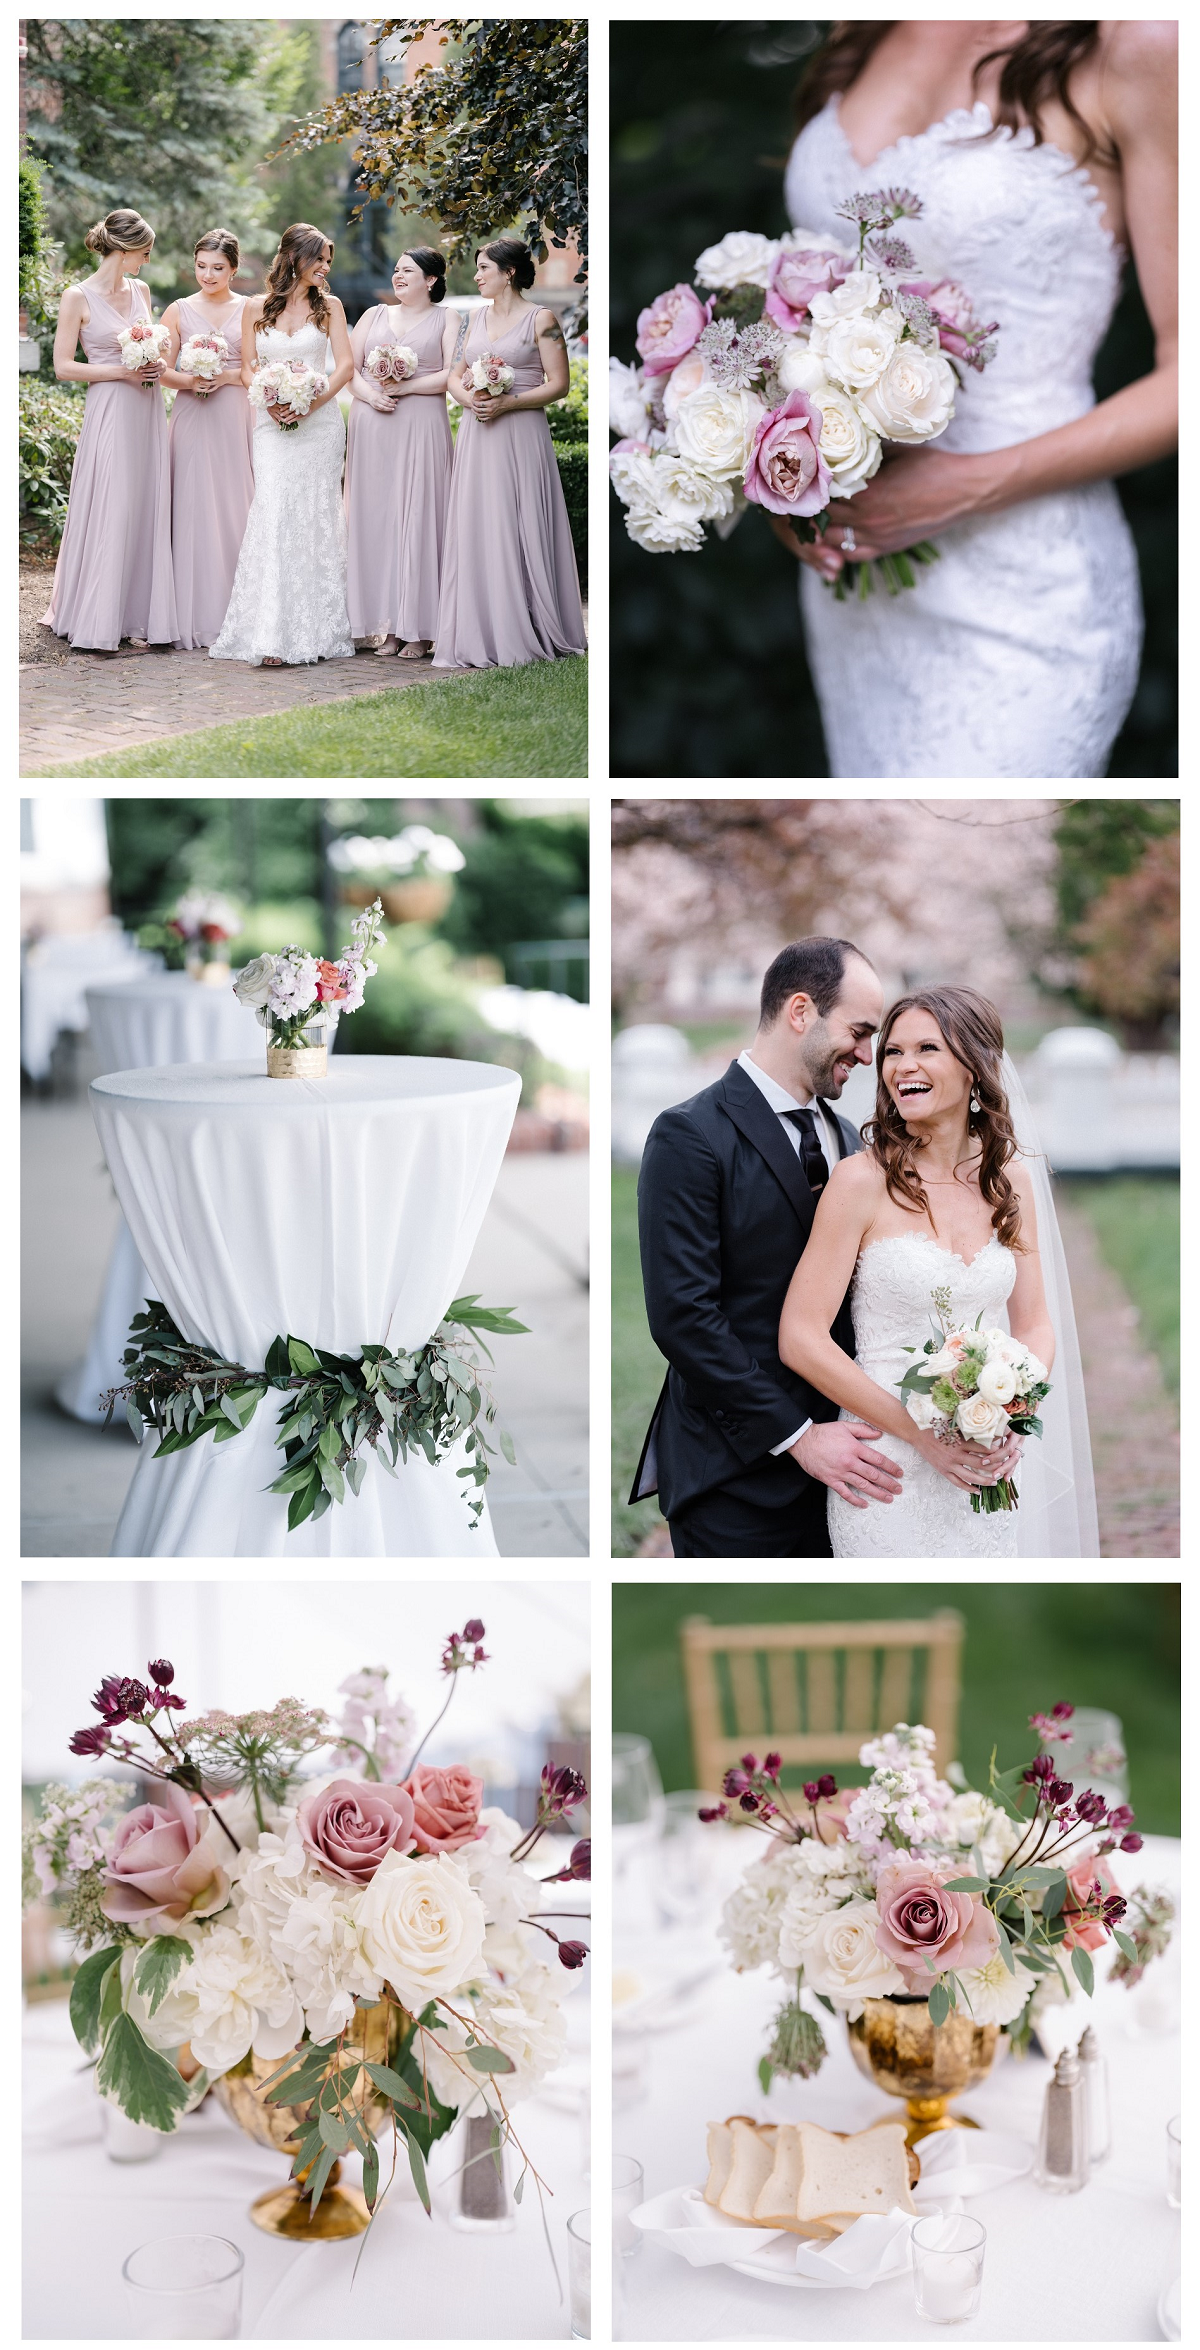 A collage of photos featuring a bridal party in lavender (bride in white). Party is holding floral bouquets of white with lavender accents. Close up on table centerpieces.